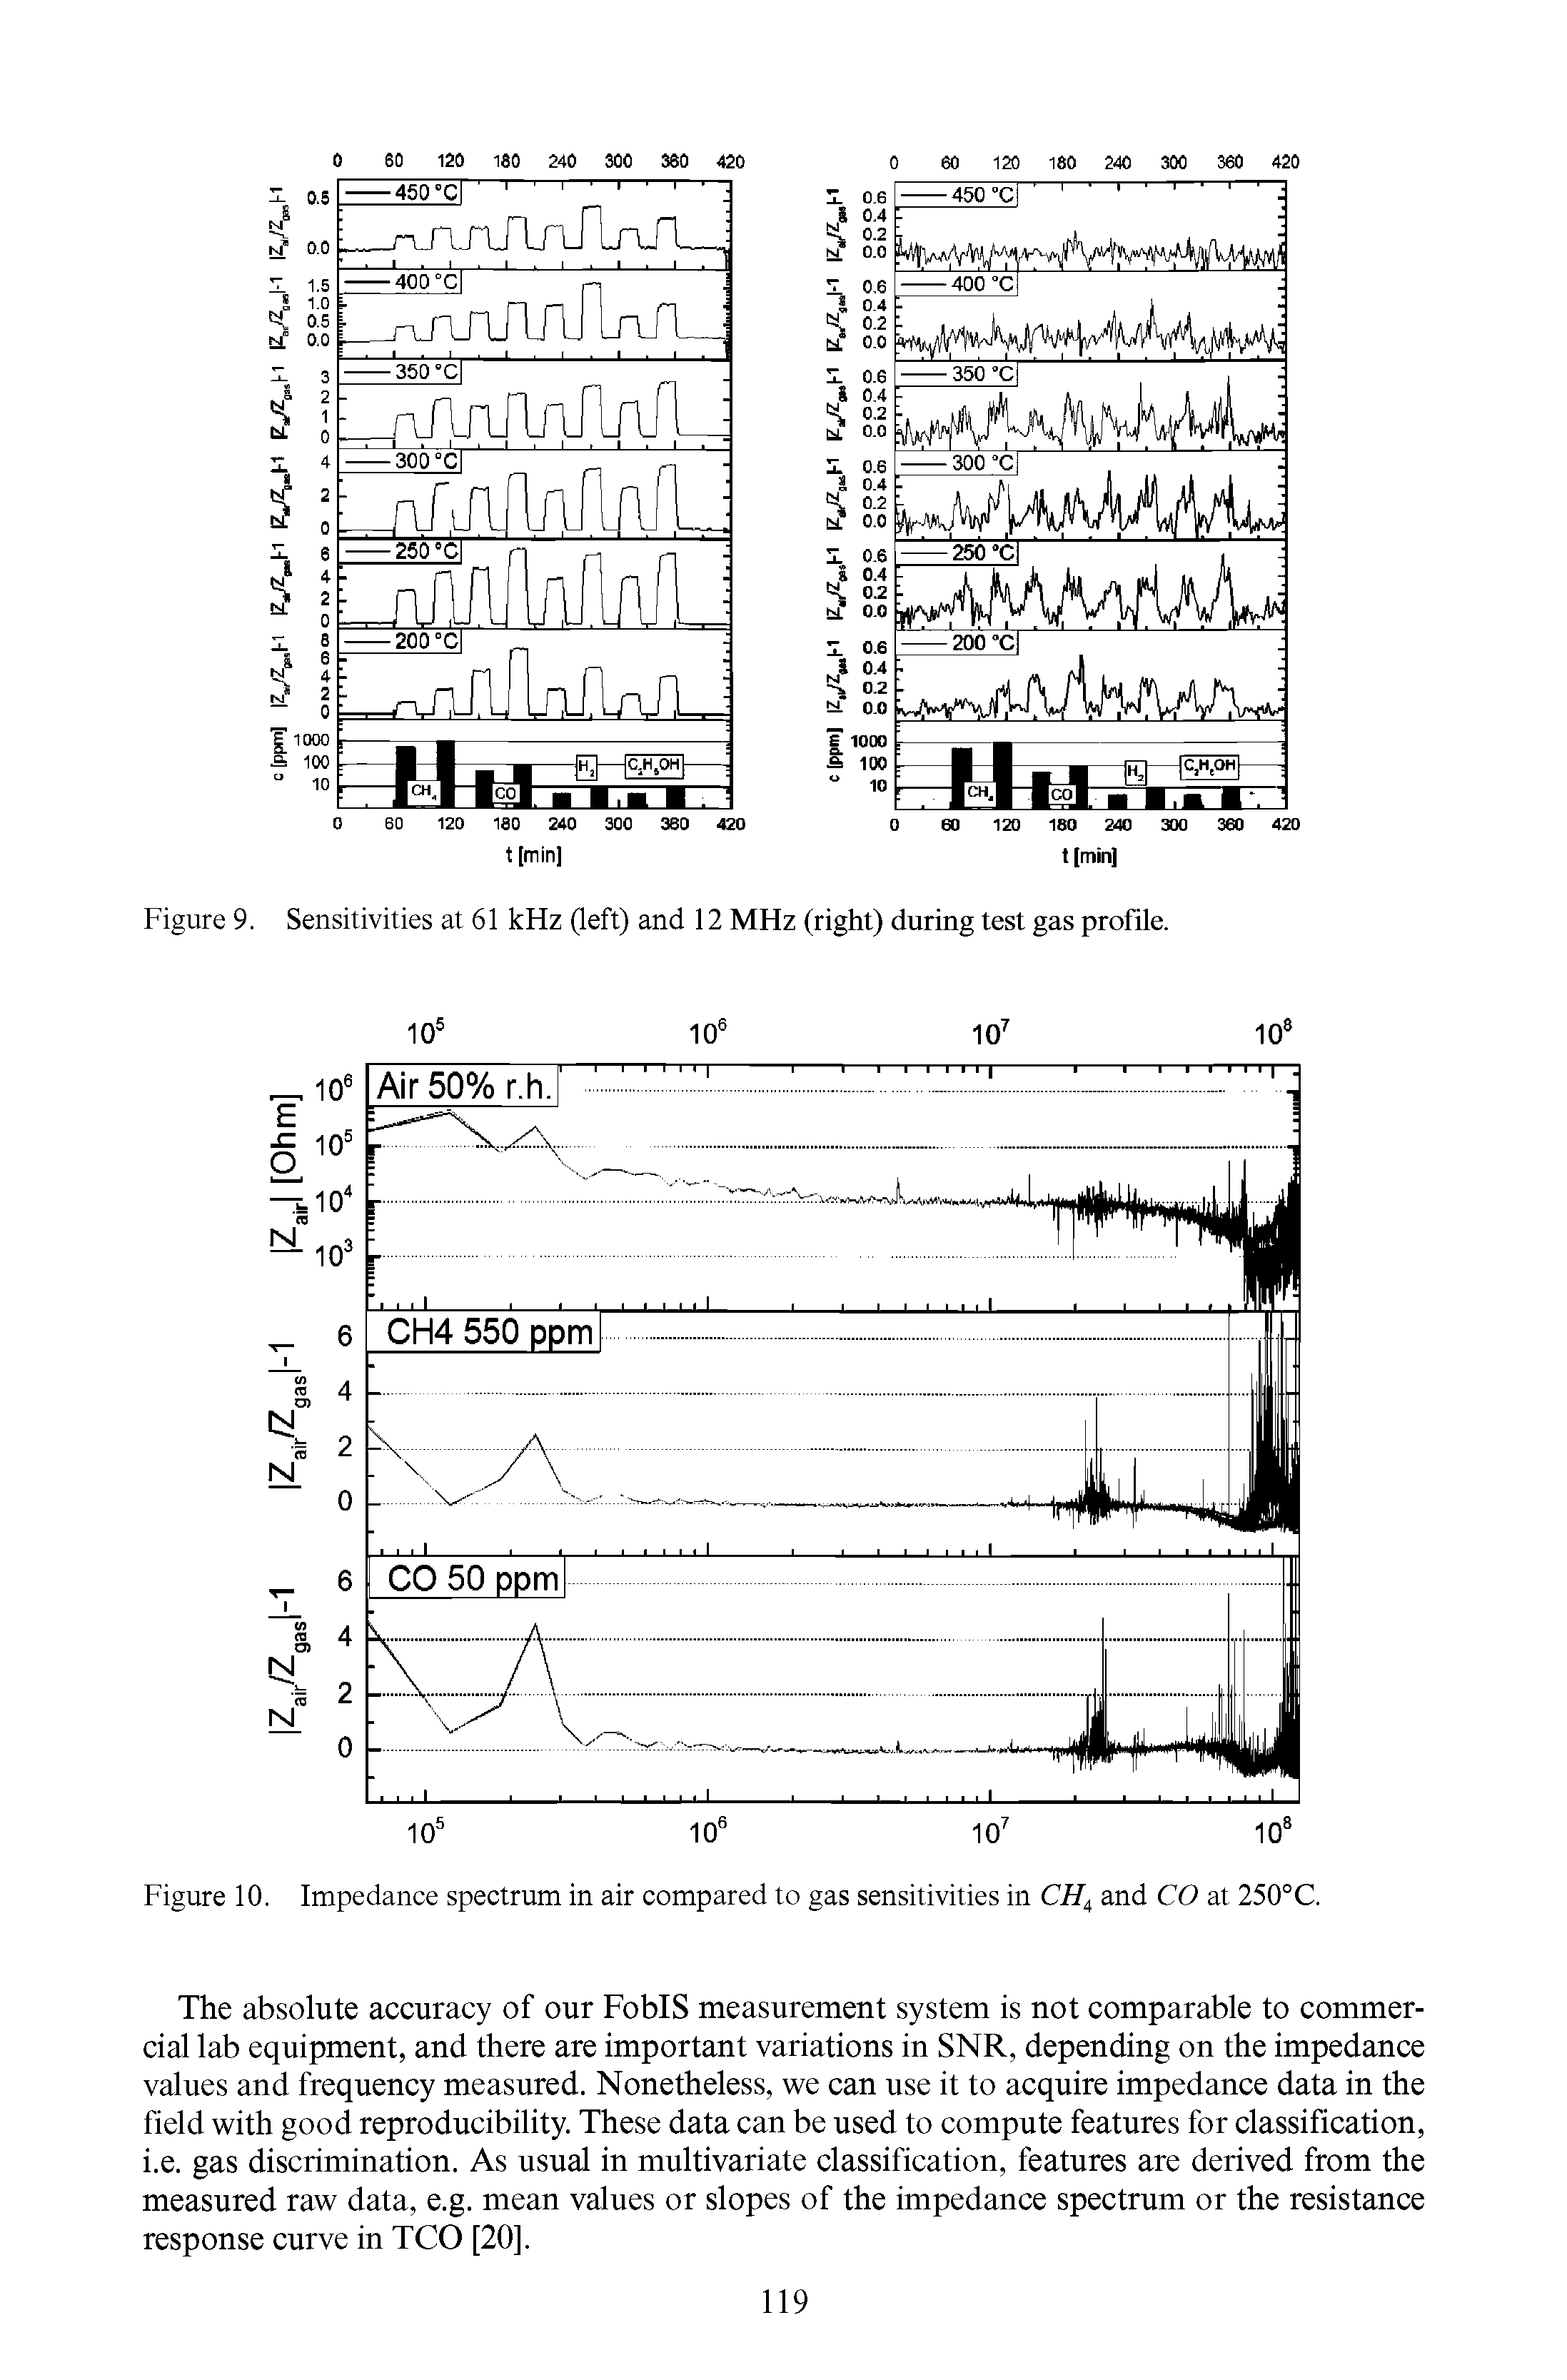 Figure 9. Sensitivities at 61 kHz (left) and 12 MHz (right) during test gas profile.